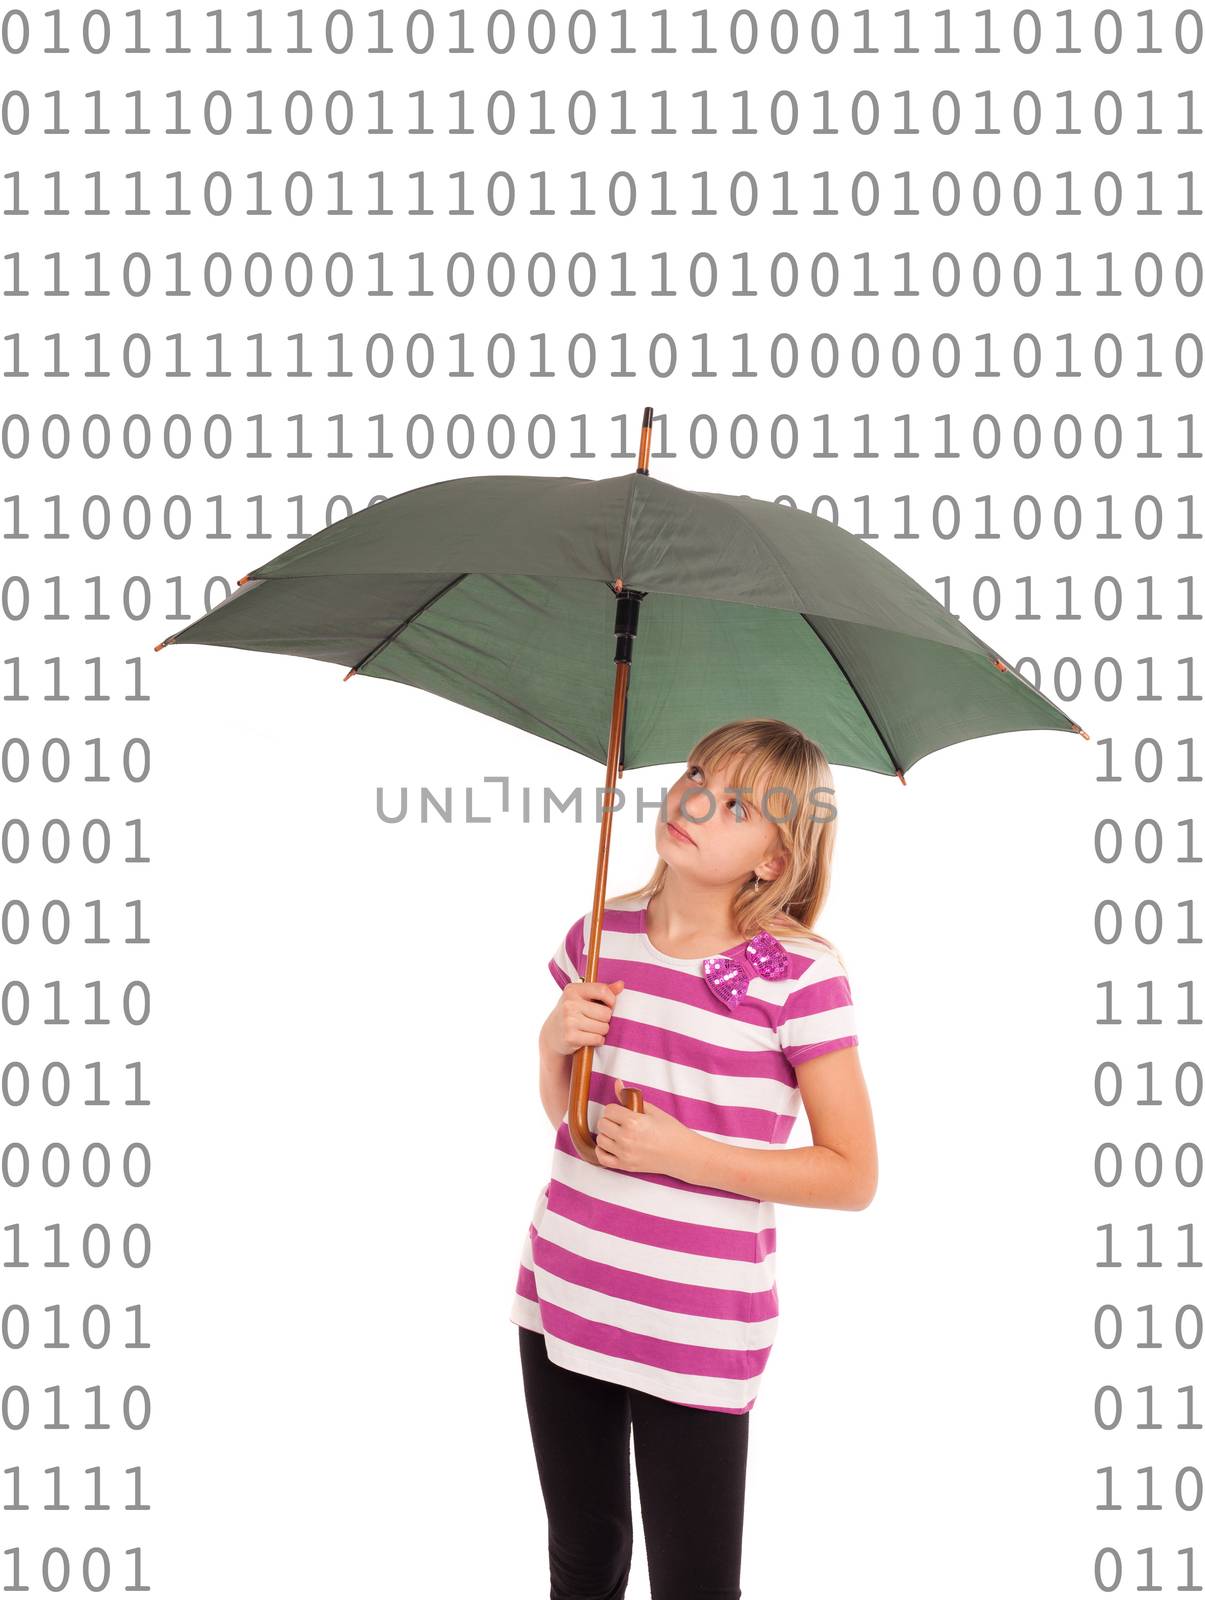 Internet protection concept - Teen girl using an umbrella as a digital shield against the 0 and 1 digit numbers. Isolated on white.